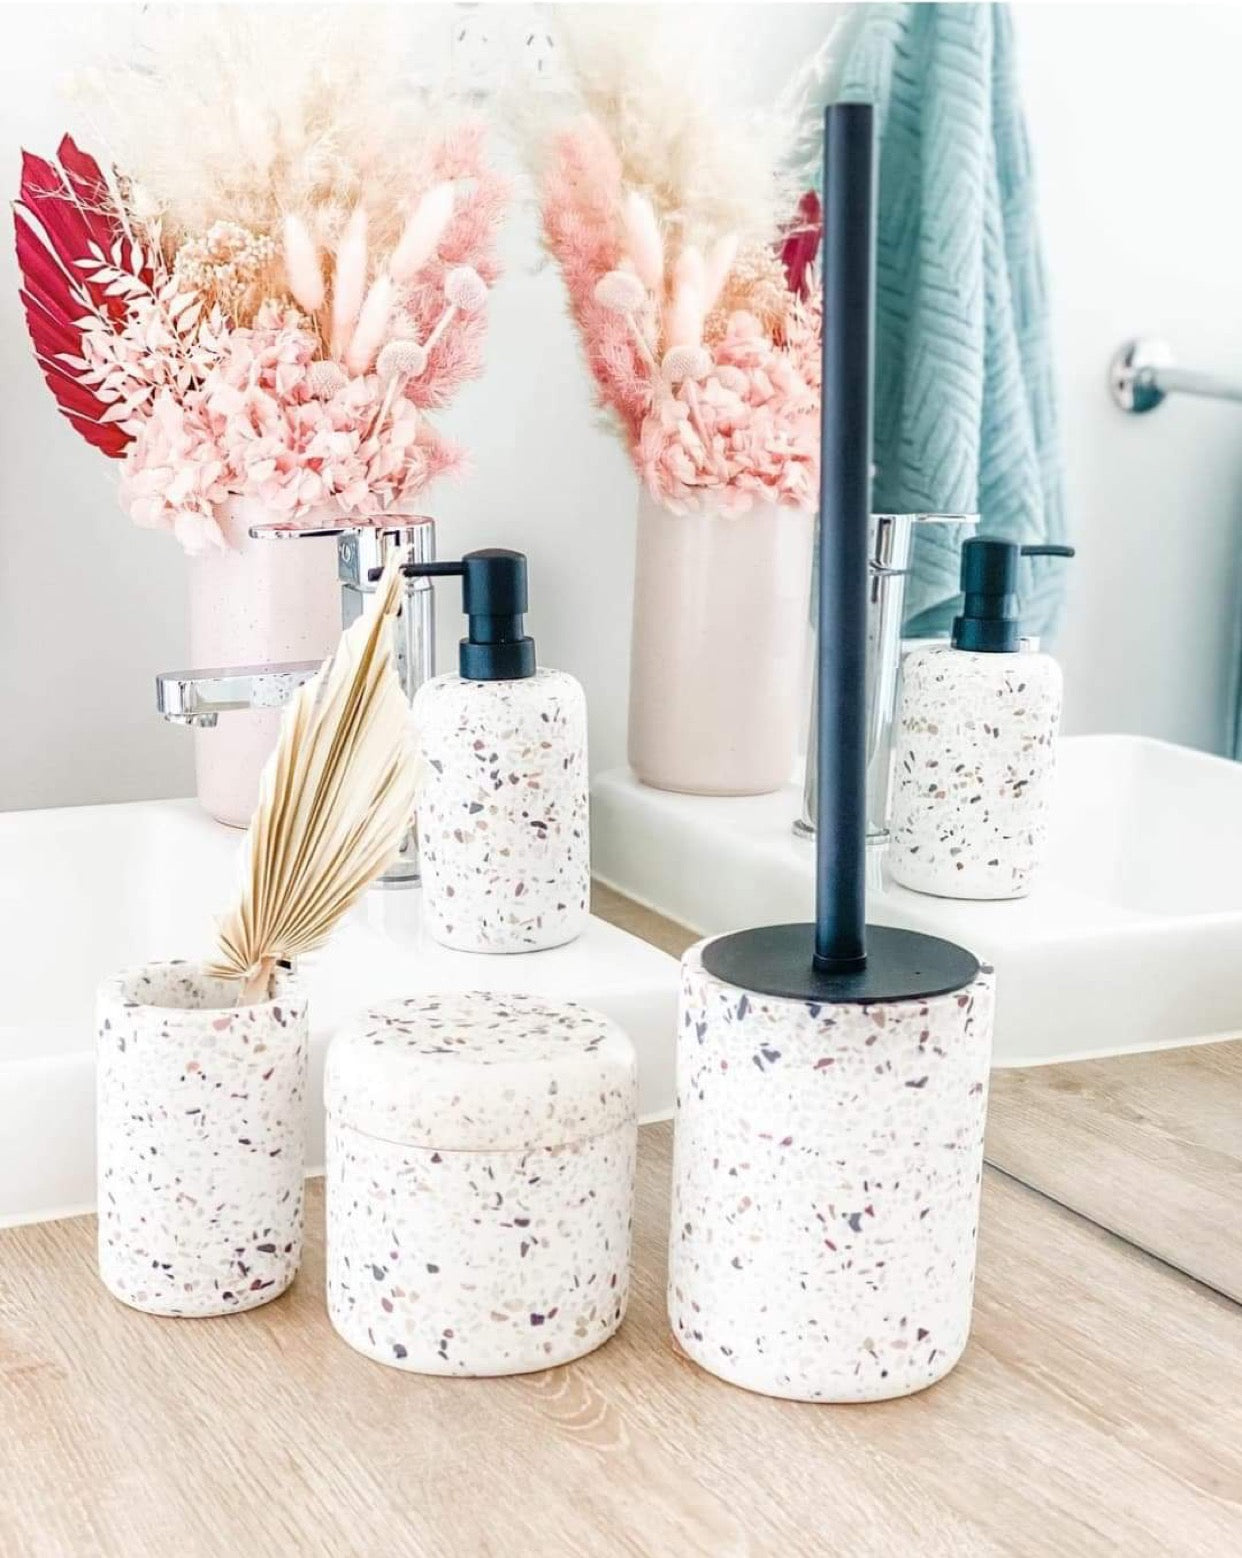 Venice White 185ml Soap Dispenser - Salt&Pepper - Made from durable resin in a delightfully sleek shape - features a matte finish with an on-trend terrazzo inlay |Bliss Gifts & Homewares - Unit 8, 259 Princes Hwy Ulladulla - Shop Online & In store - 0427795959, 44541523 - Australia wide shipping 